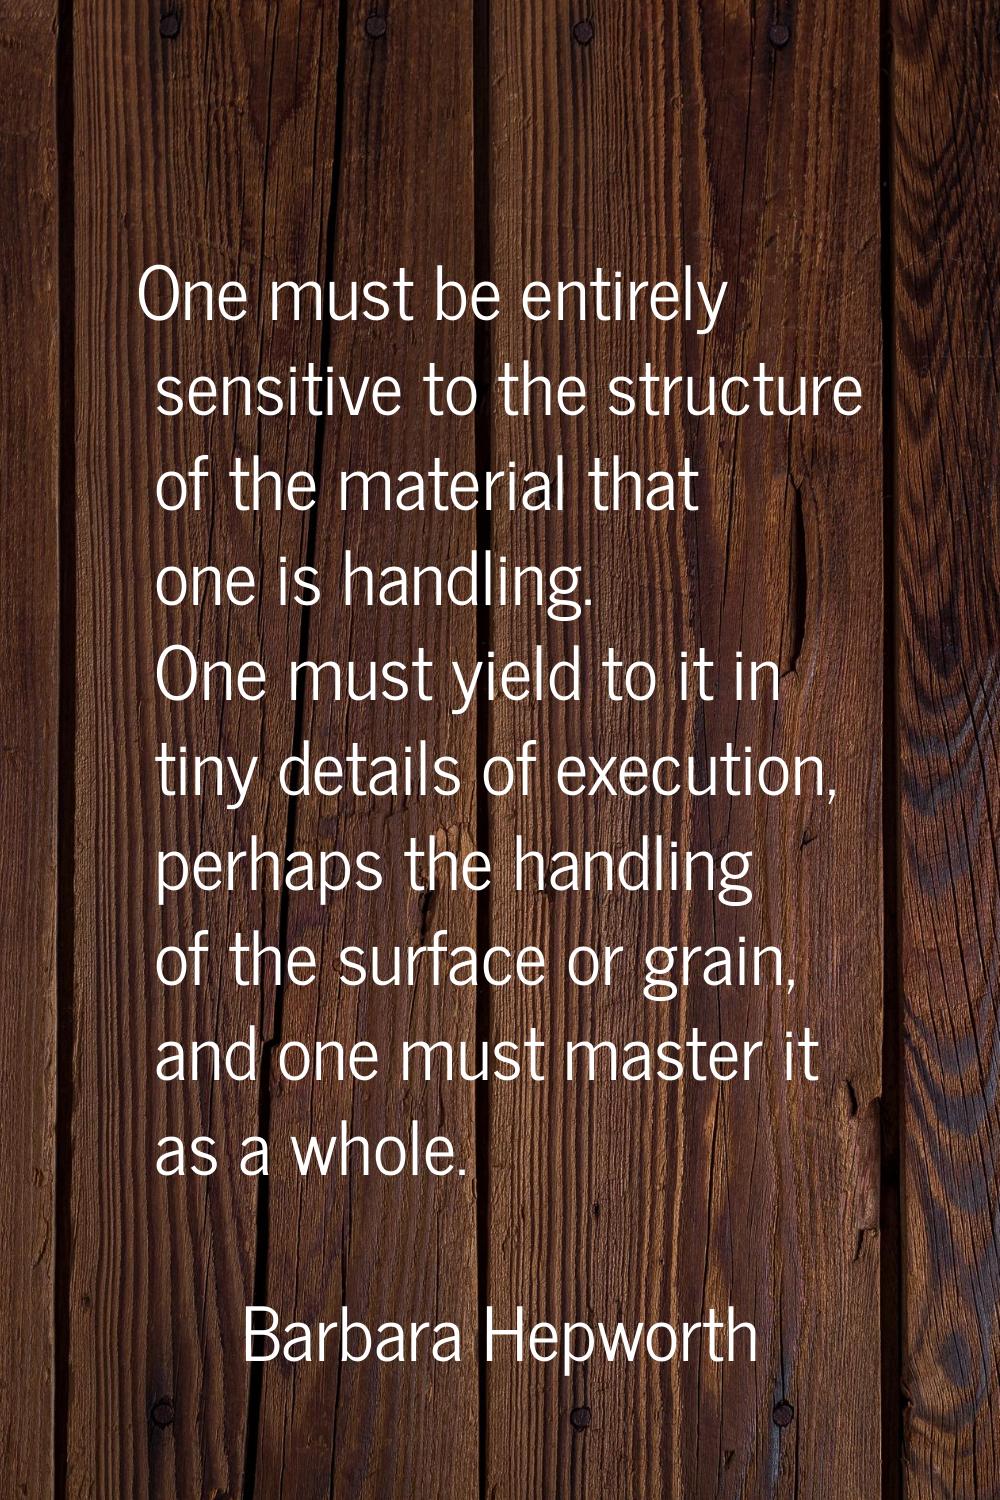 One must be entirely sensitive to the structure of the material that one is handling. One must yiel